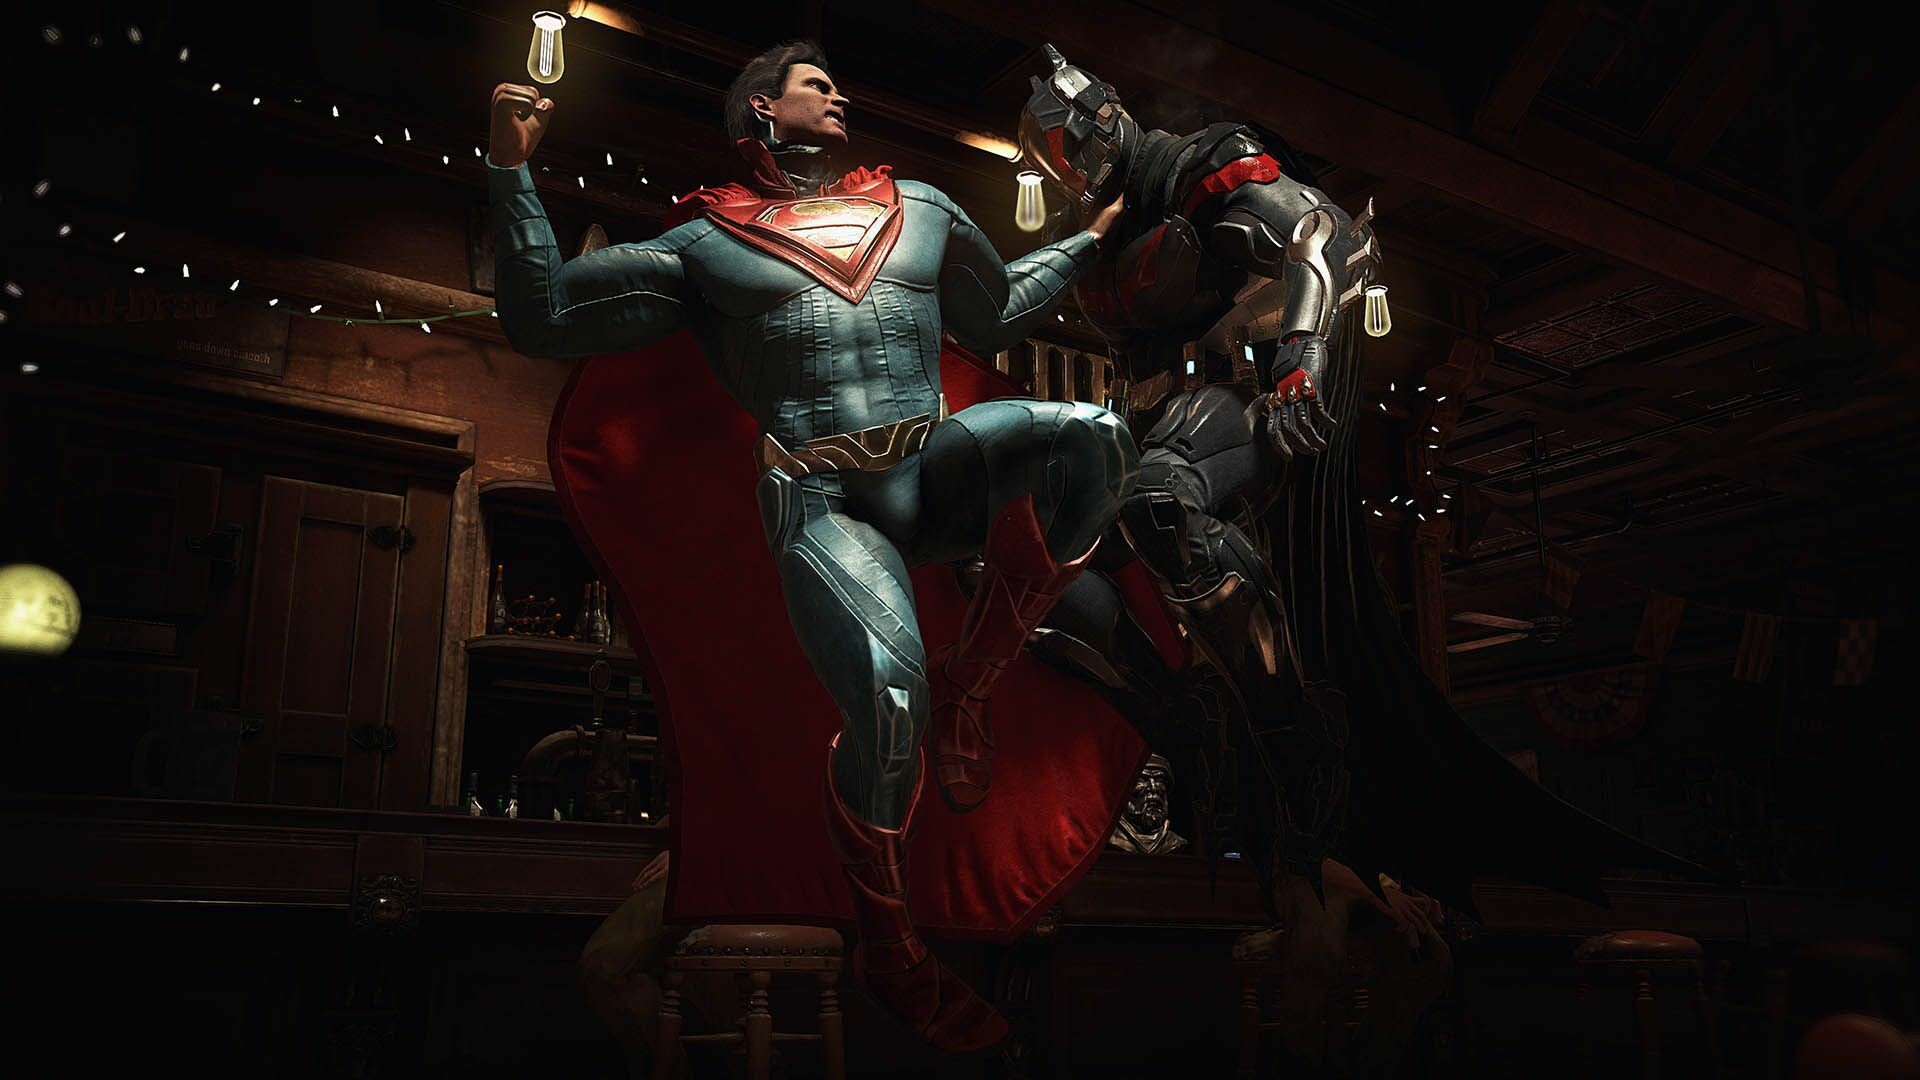 Injustice: A fighting game in which players compete in one-on-one combat using characters from the DC Universe and other third-party franchise. 1920x1080 Full HD Wallpaper.